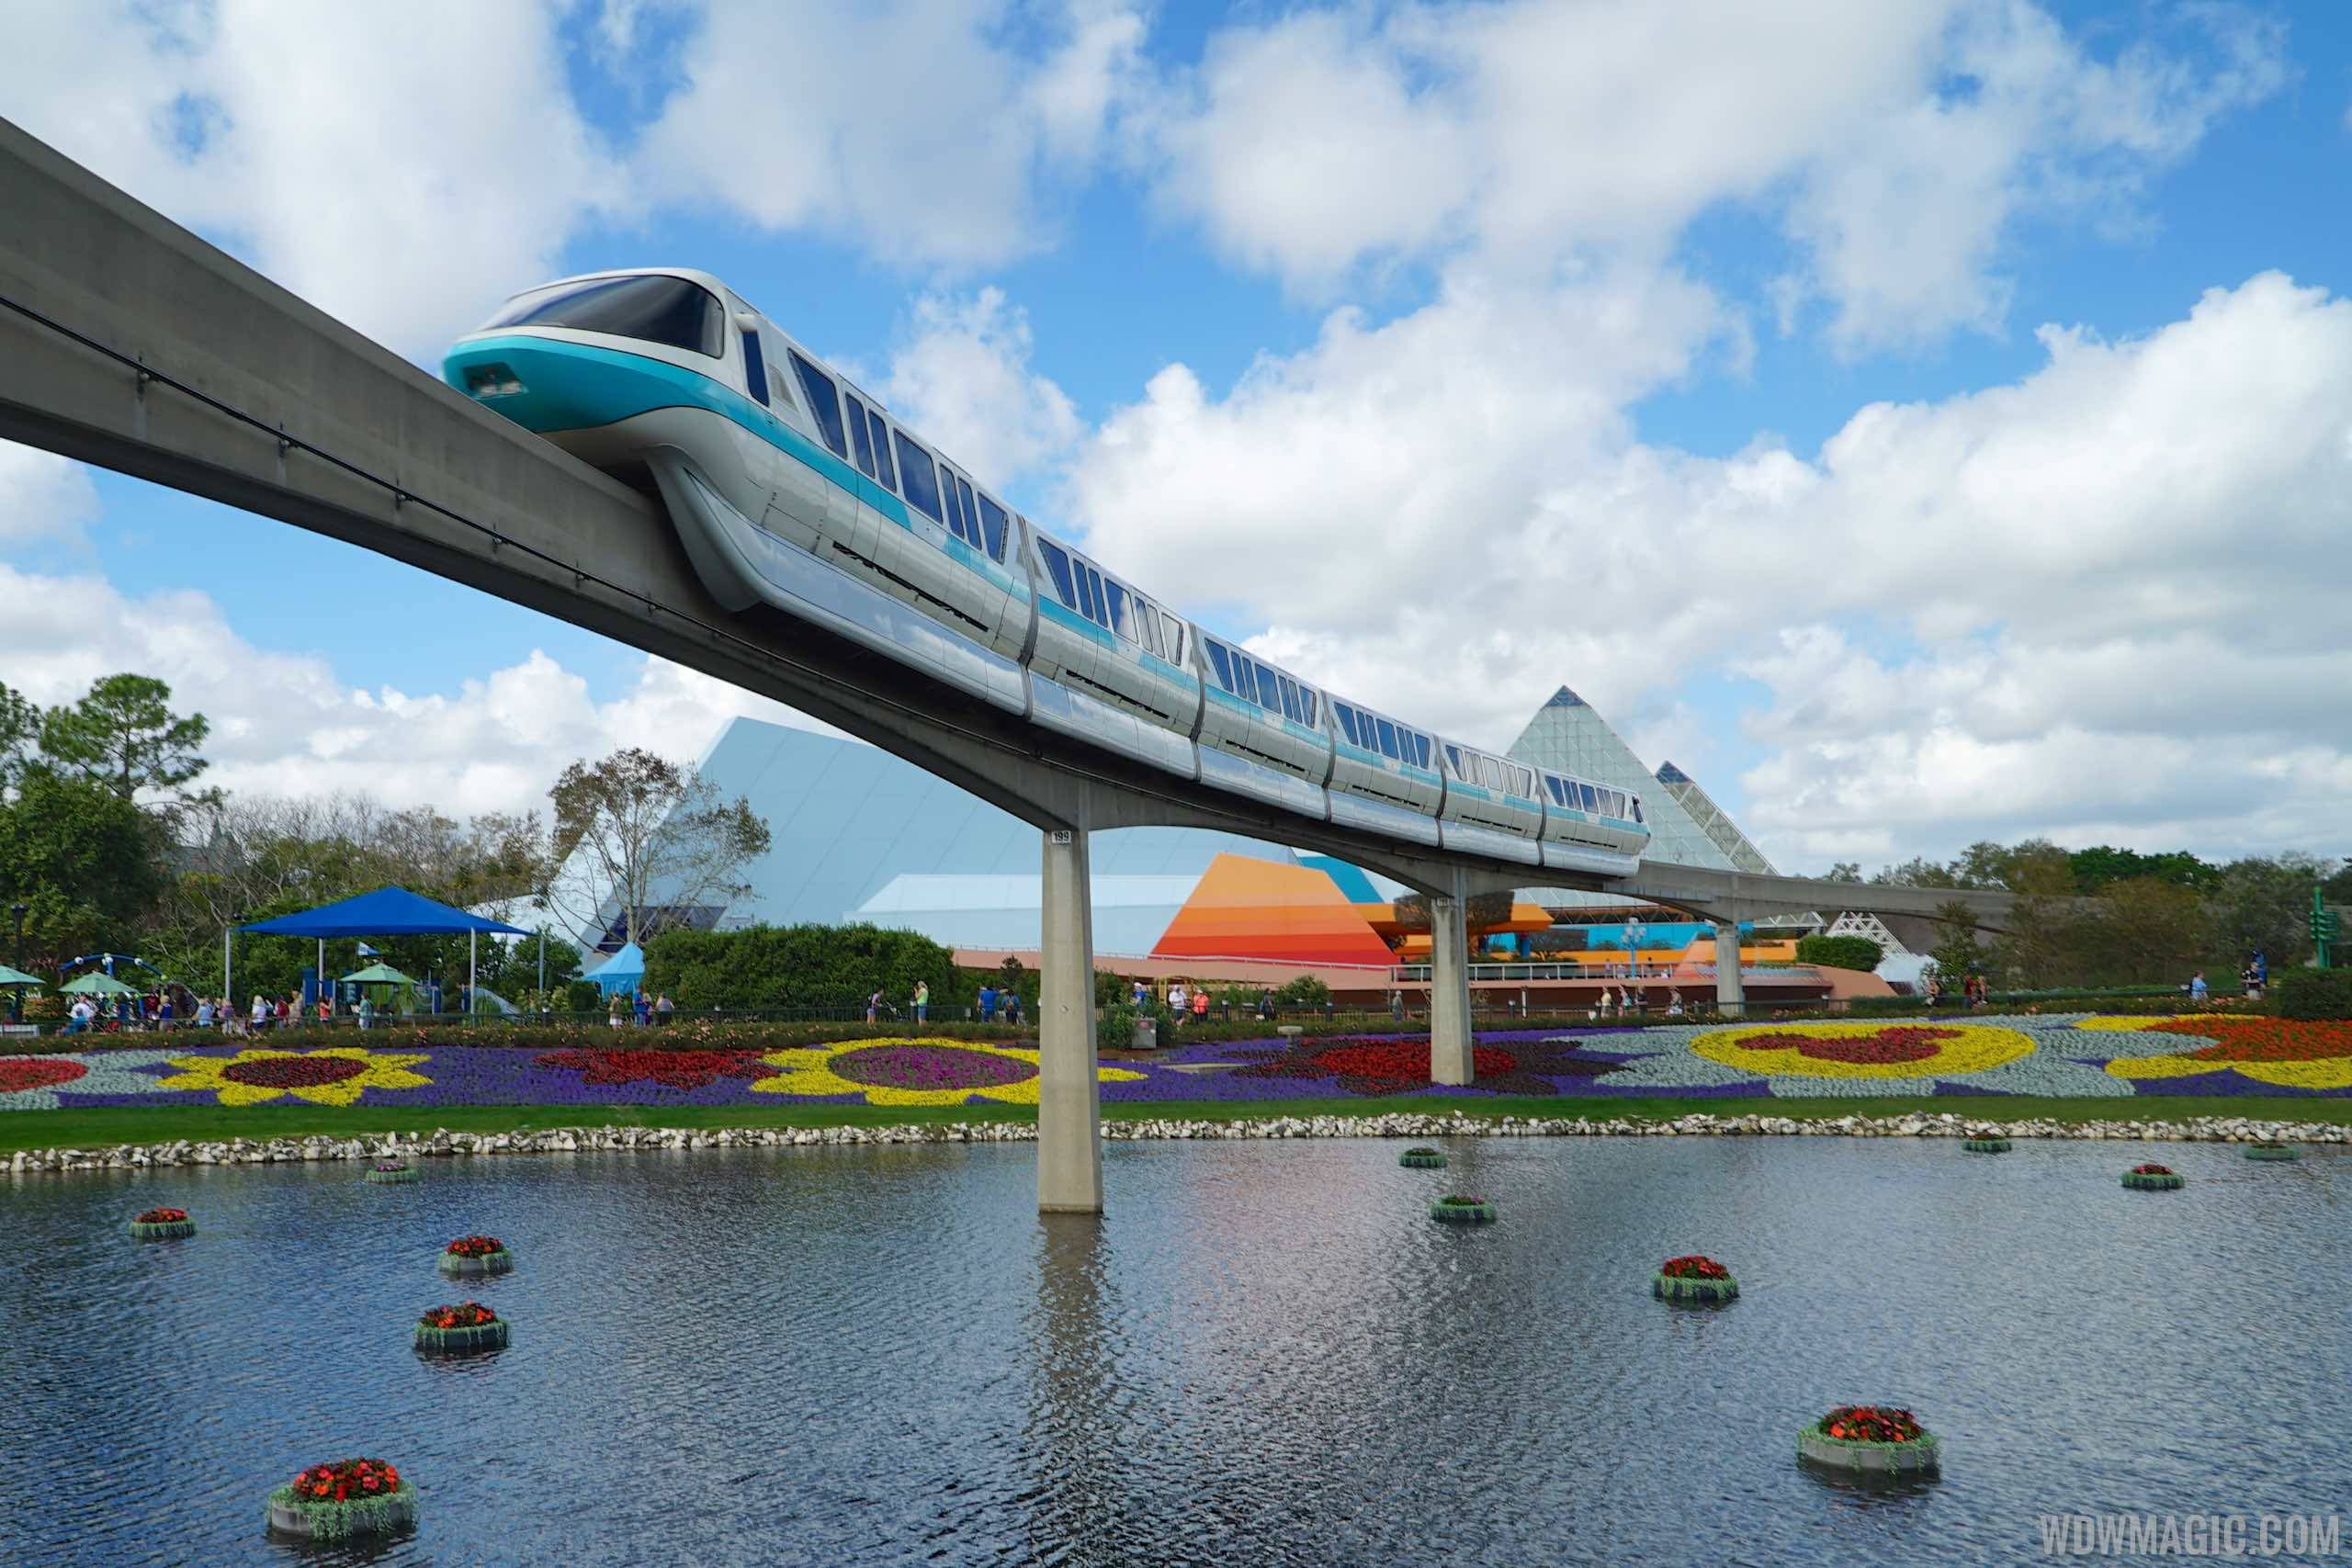 2015 Epcot Flower and Garden Festival - Monorail